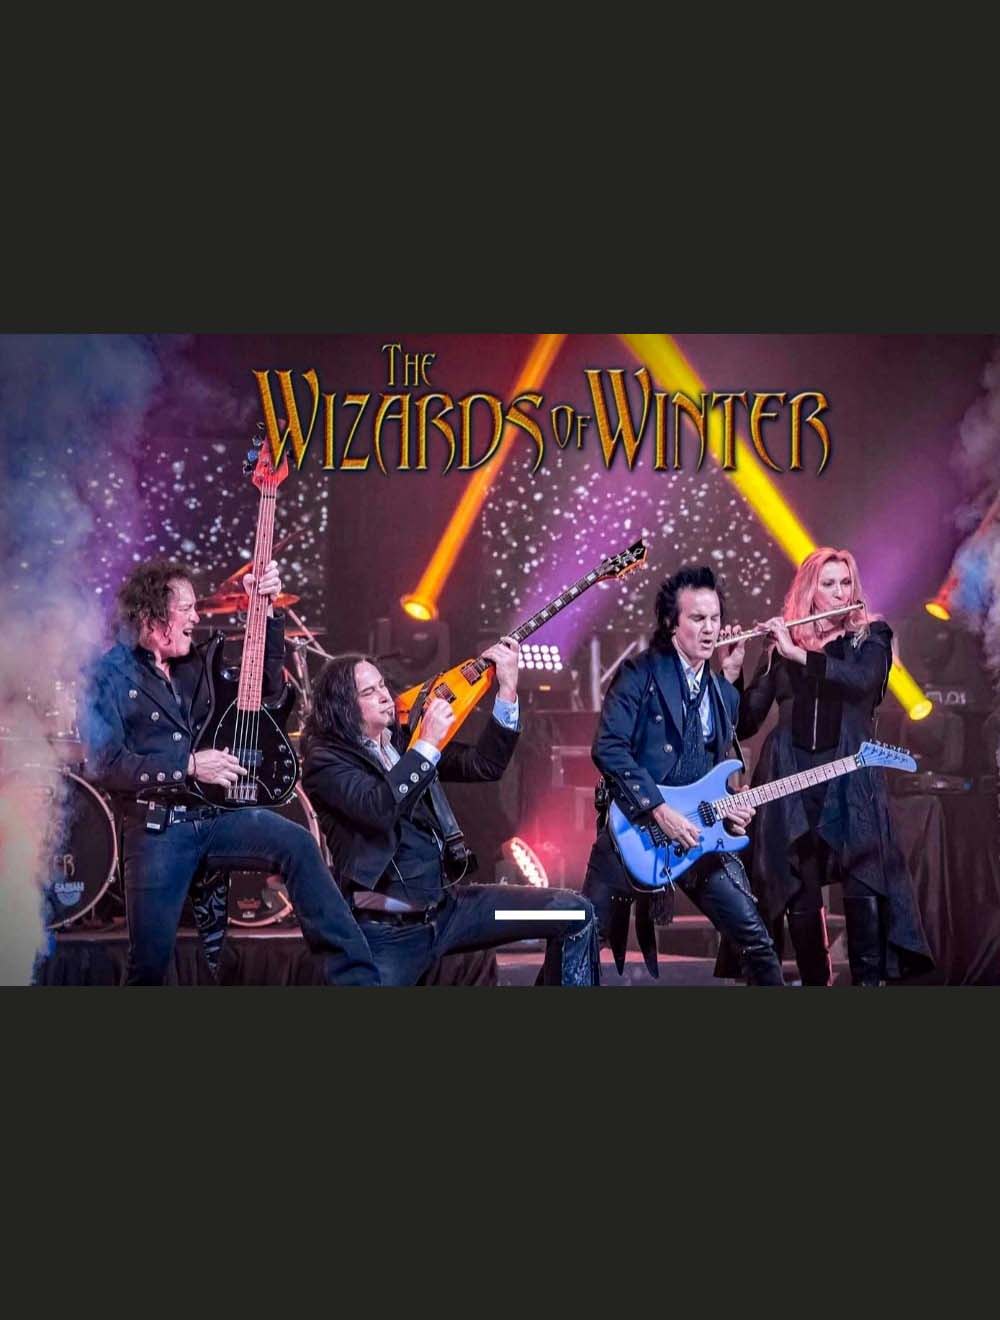 "The Wizards of Winter," which features former members of Rainbow and Ted Nugent and Alice Cooper's bands, will perform on Saturday at Canton Palace Theatre.